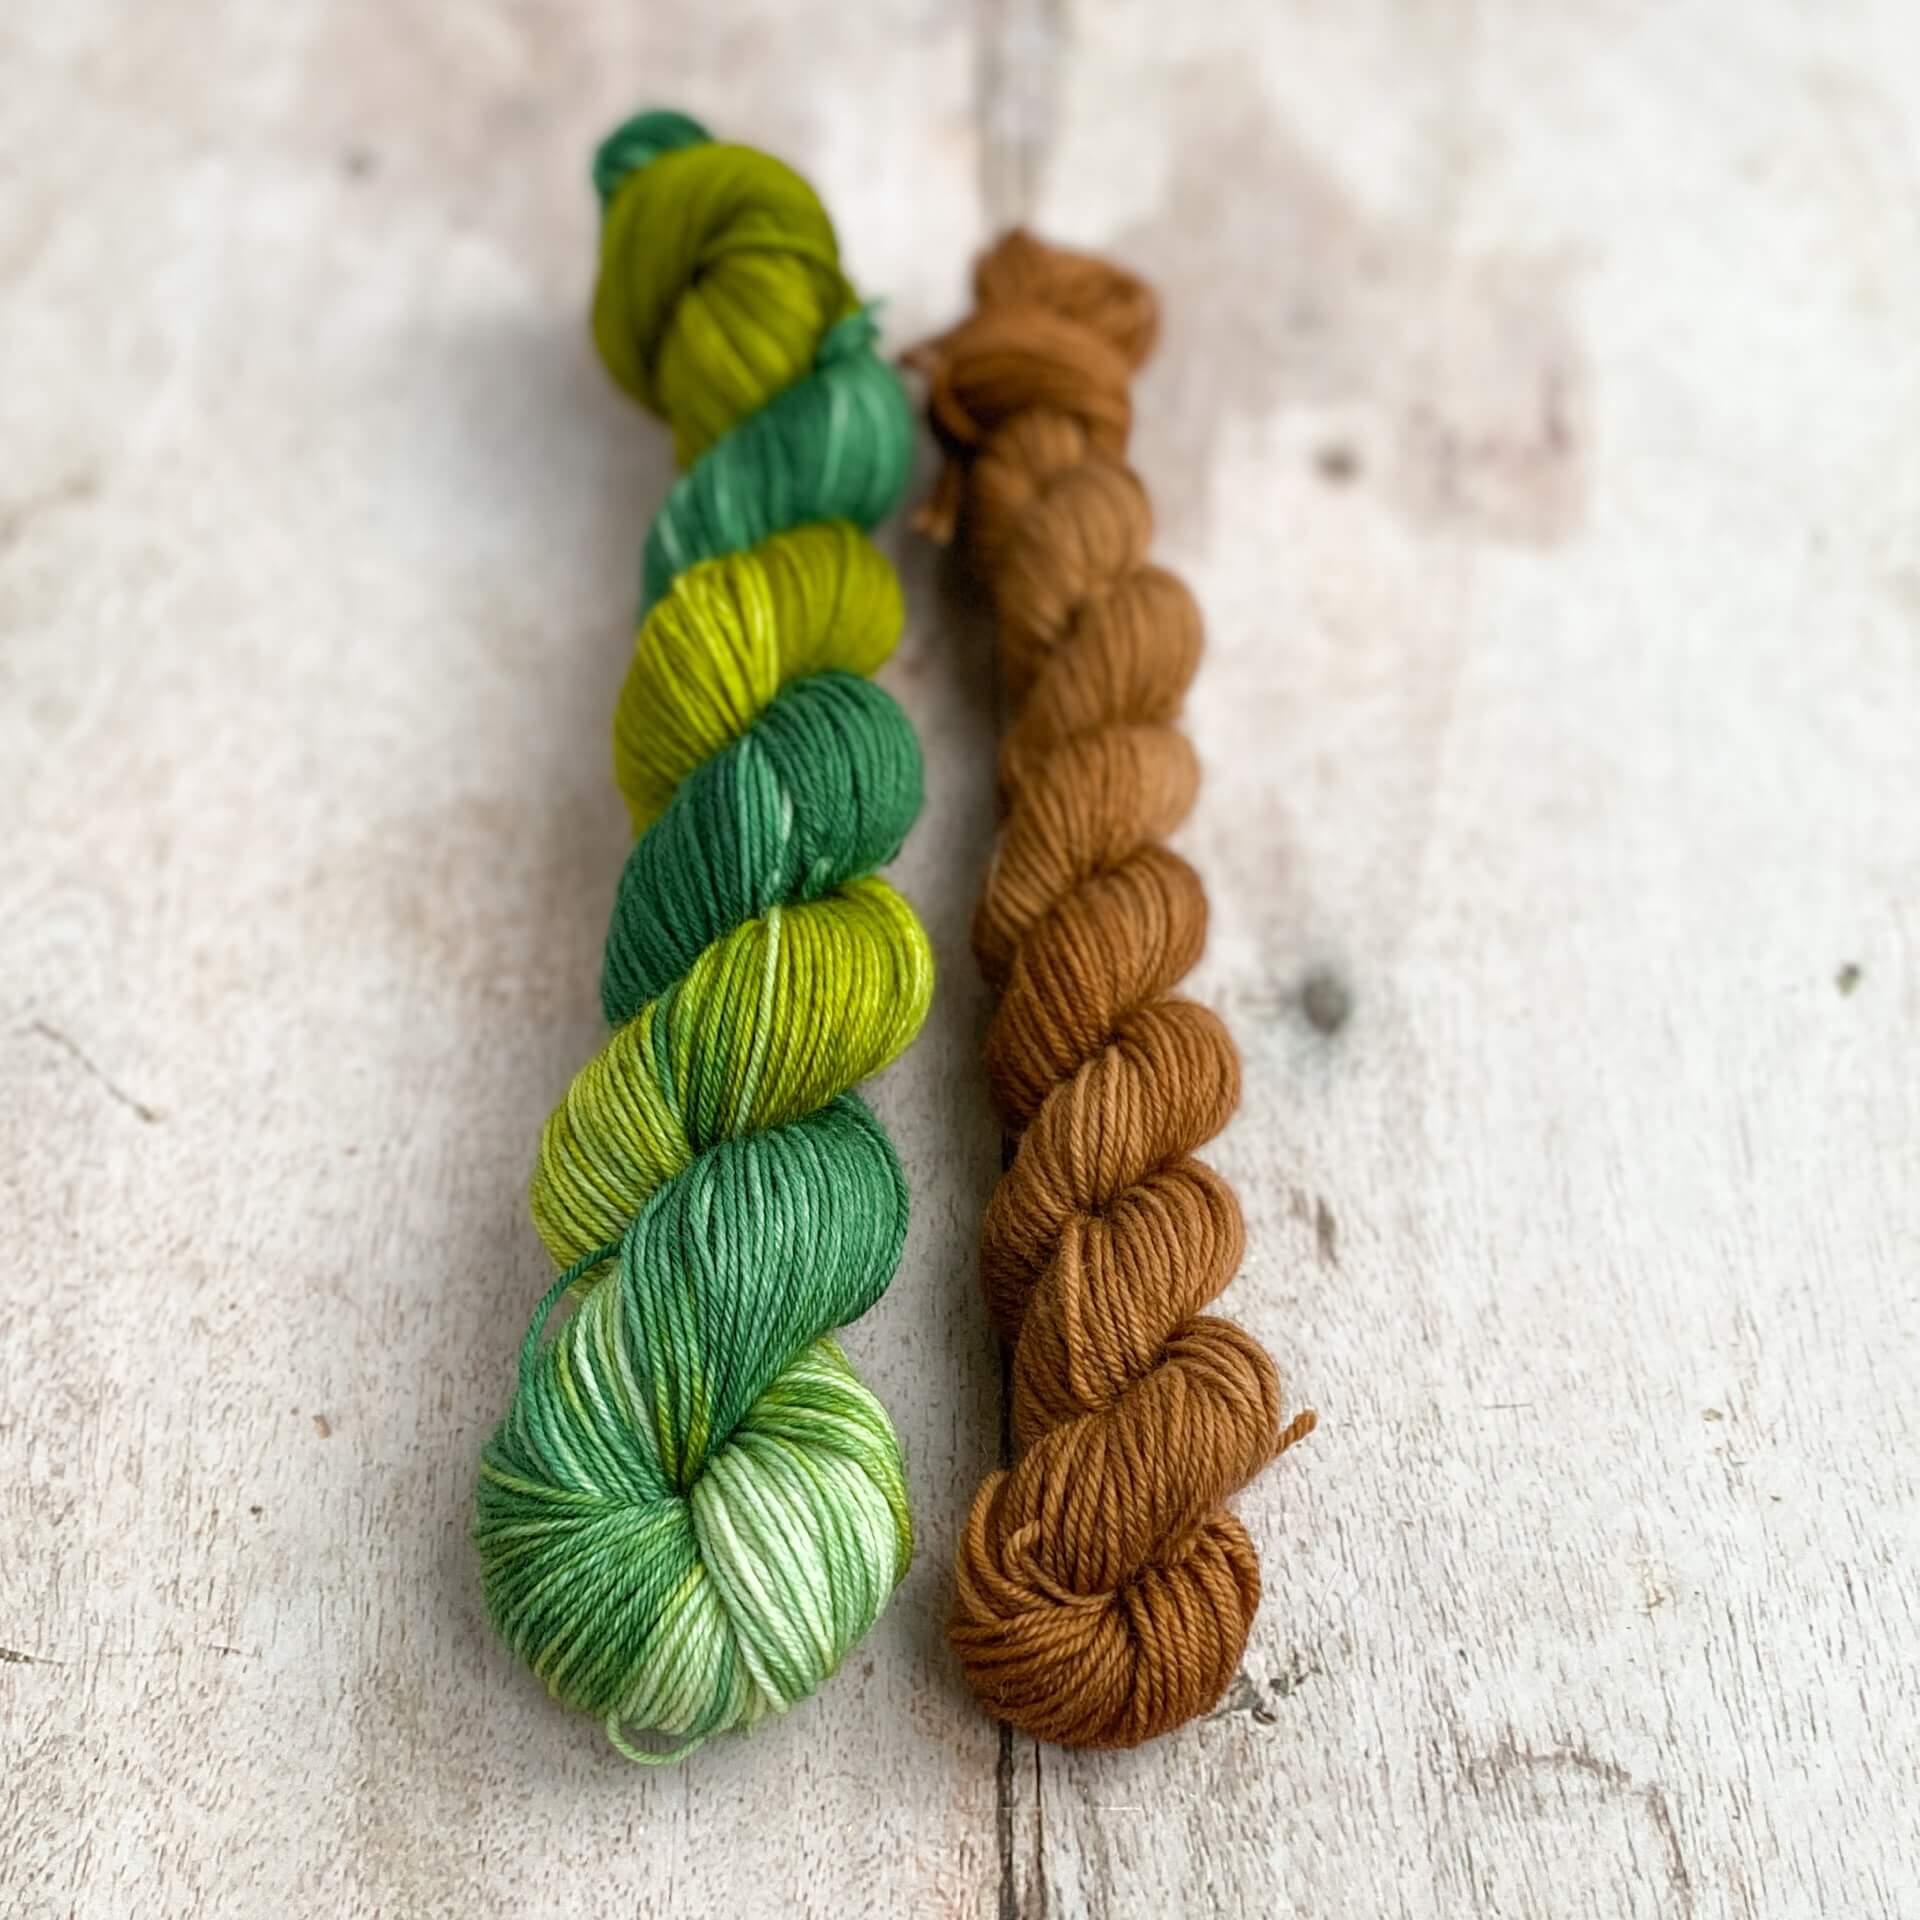 Two skeins of yarn on a wooden table. One is dyed with green dyes and the other is dyed with a brown dye. Together they look like a fir tree in winter. 